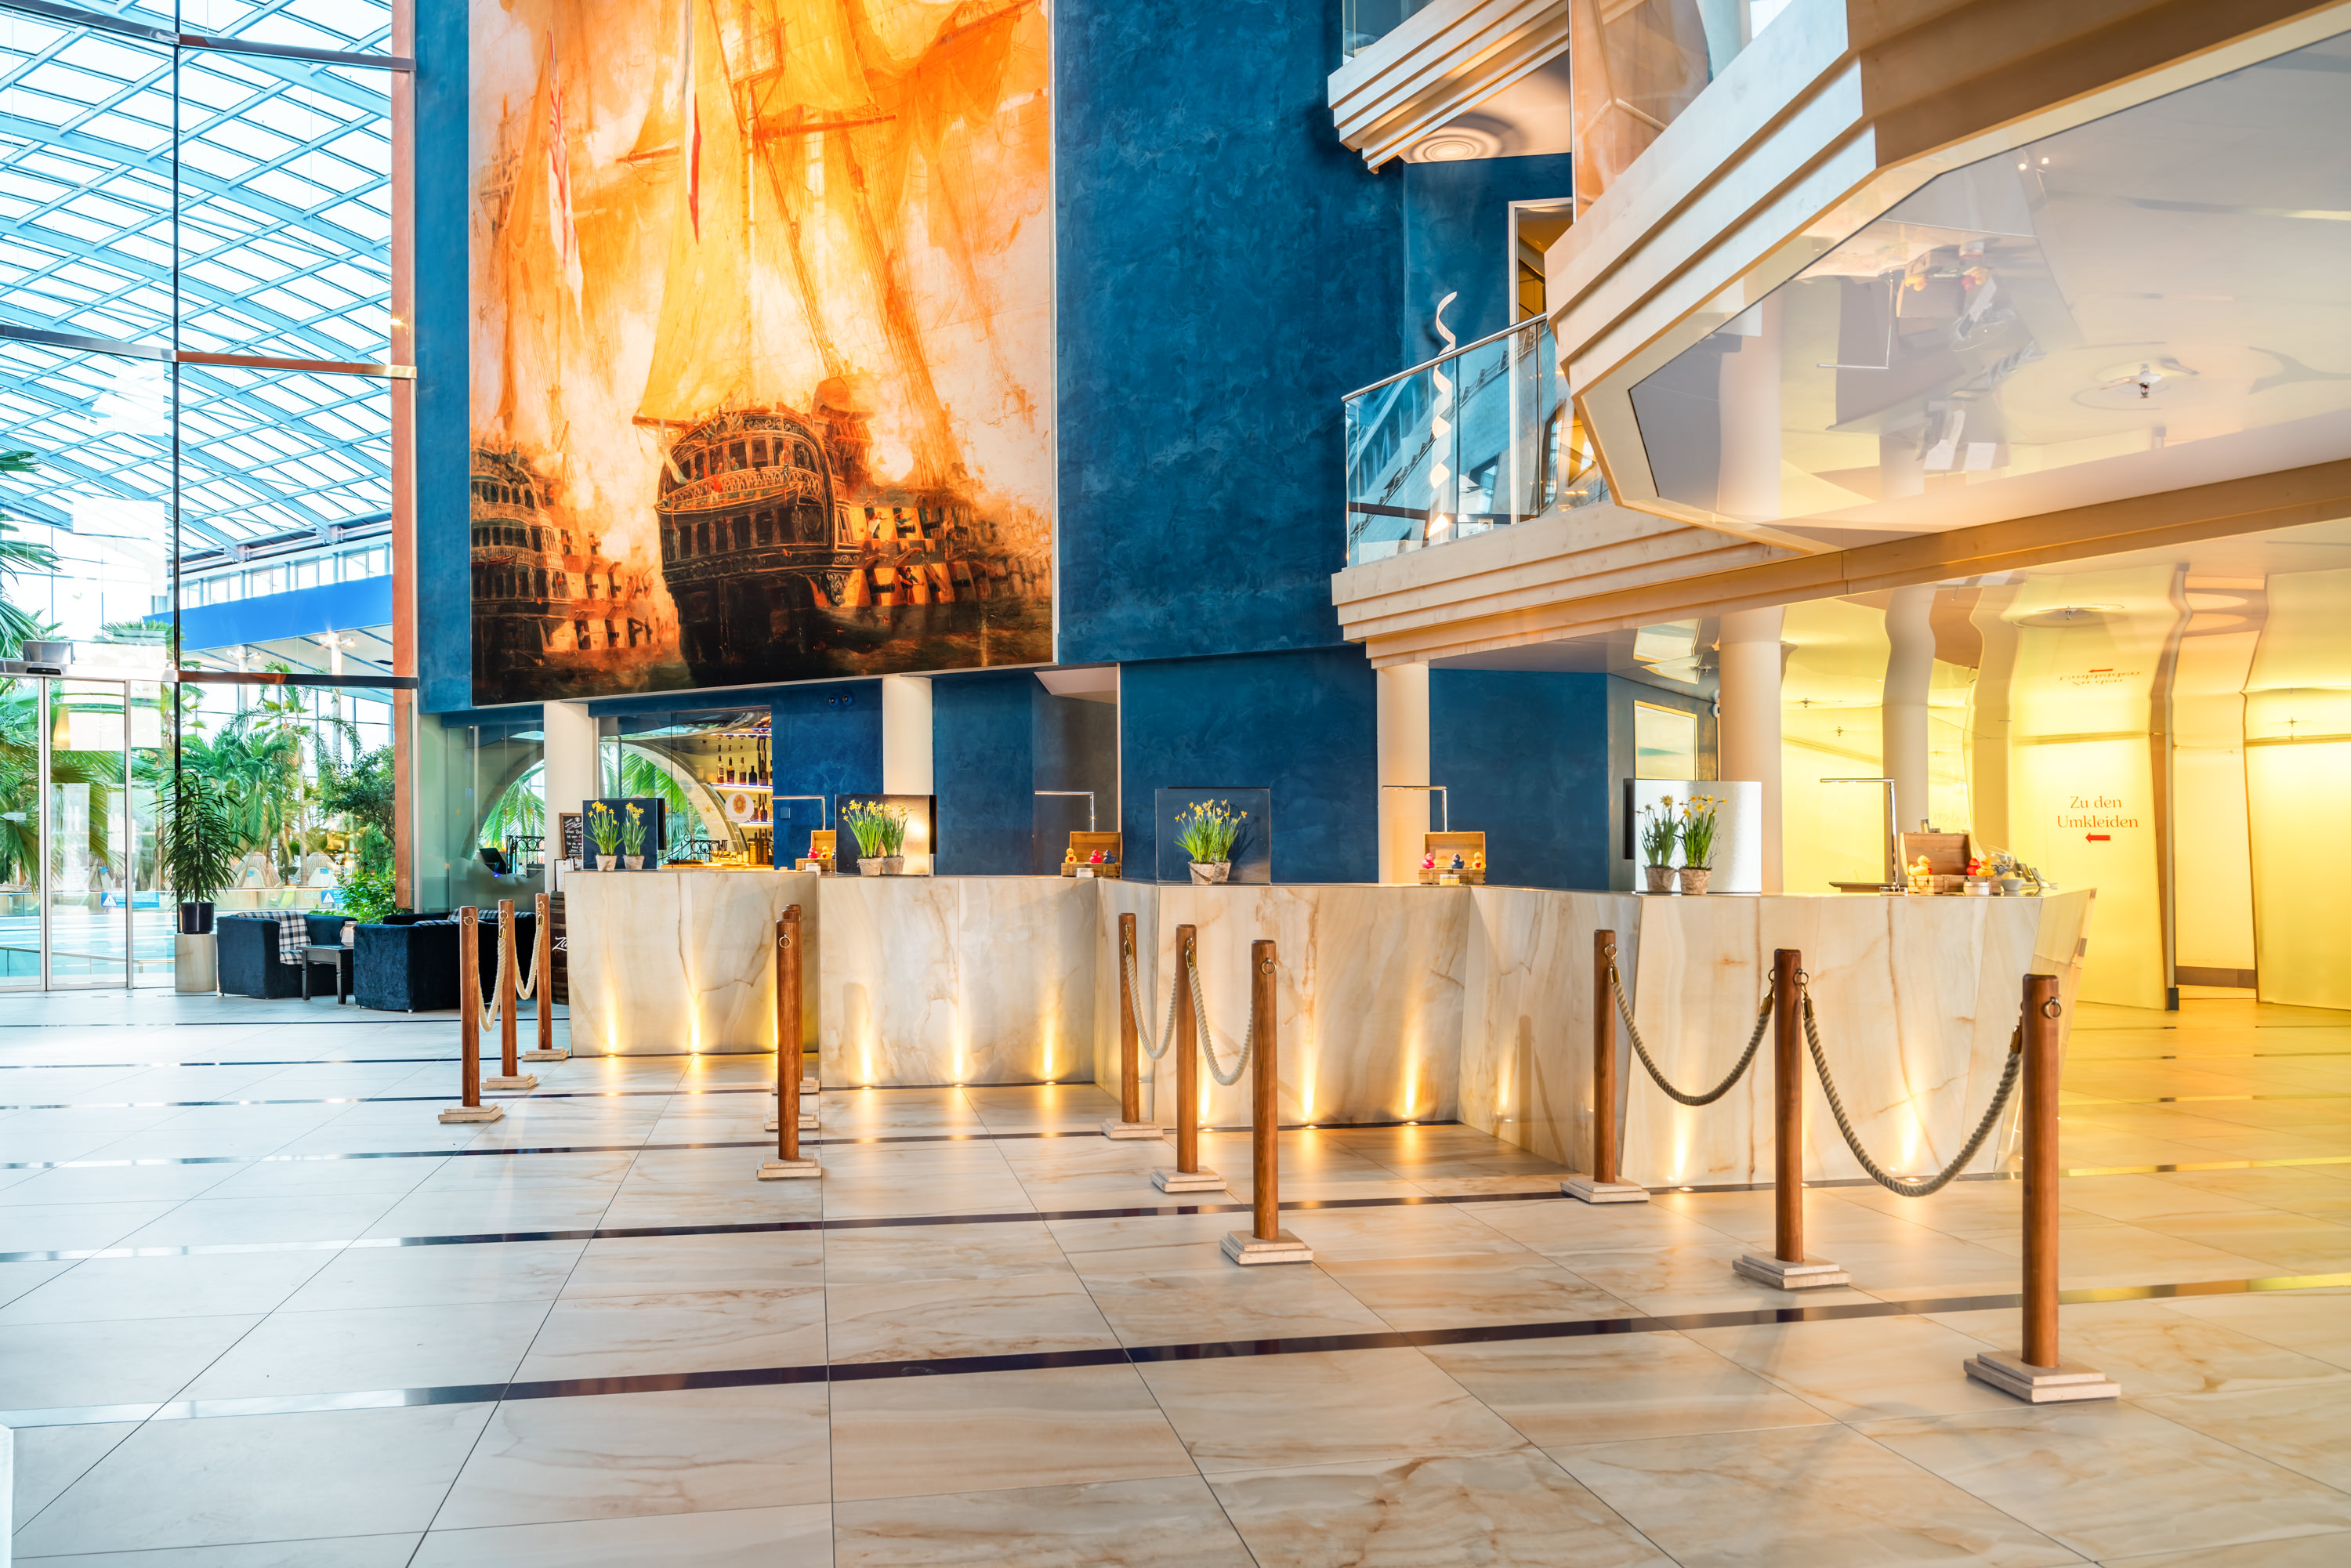 Hotel Victory Therme Erding <br/>265.01 ew <br/> <a href='http://vakantieoplossing.nl/outpage/?id=56e0e4137223f8c49d50450f25394106' target='_blank'>View Details</a>